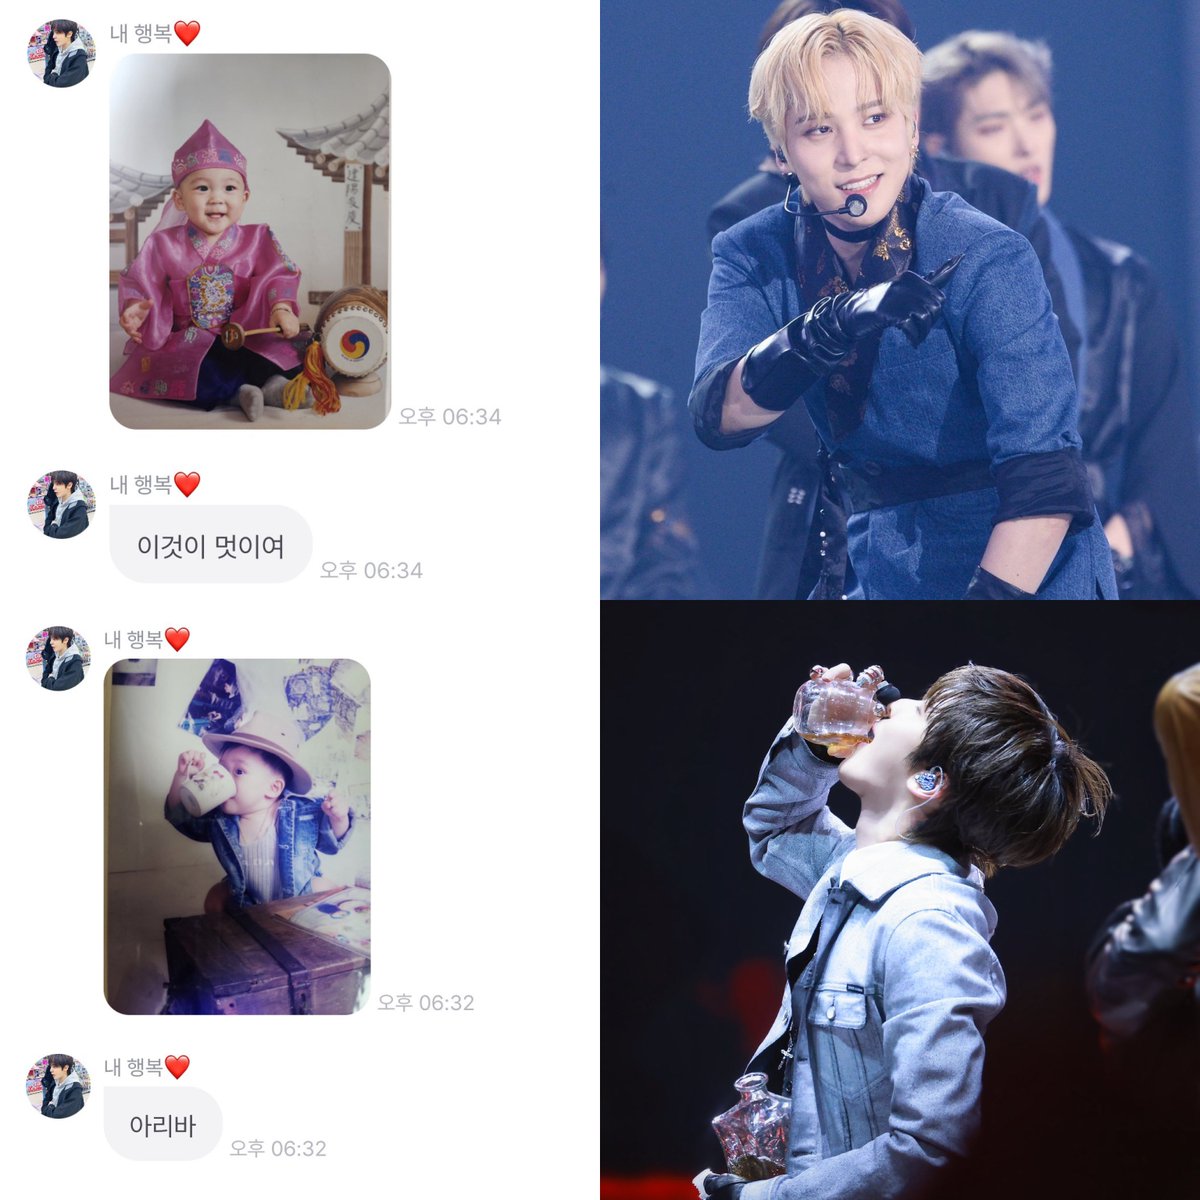 yunho said his baby pic wearing hanbok is “igeosi meosiyeo” (The Real part) and the second one is baby cowboy yunho drinking like in Arriba

is this a destiny? all about his baby pics make sense with ateez things😭 even his baby pirate pic one🥹